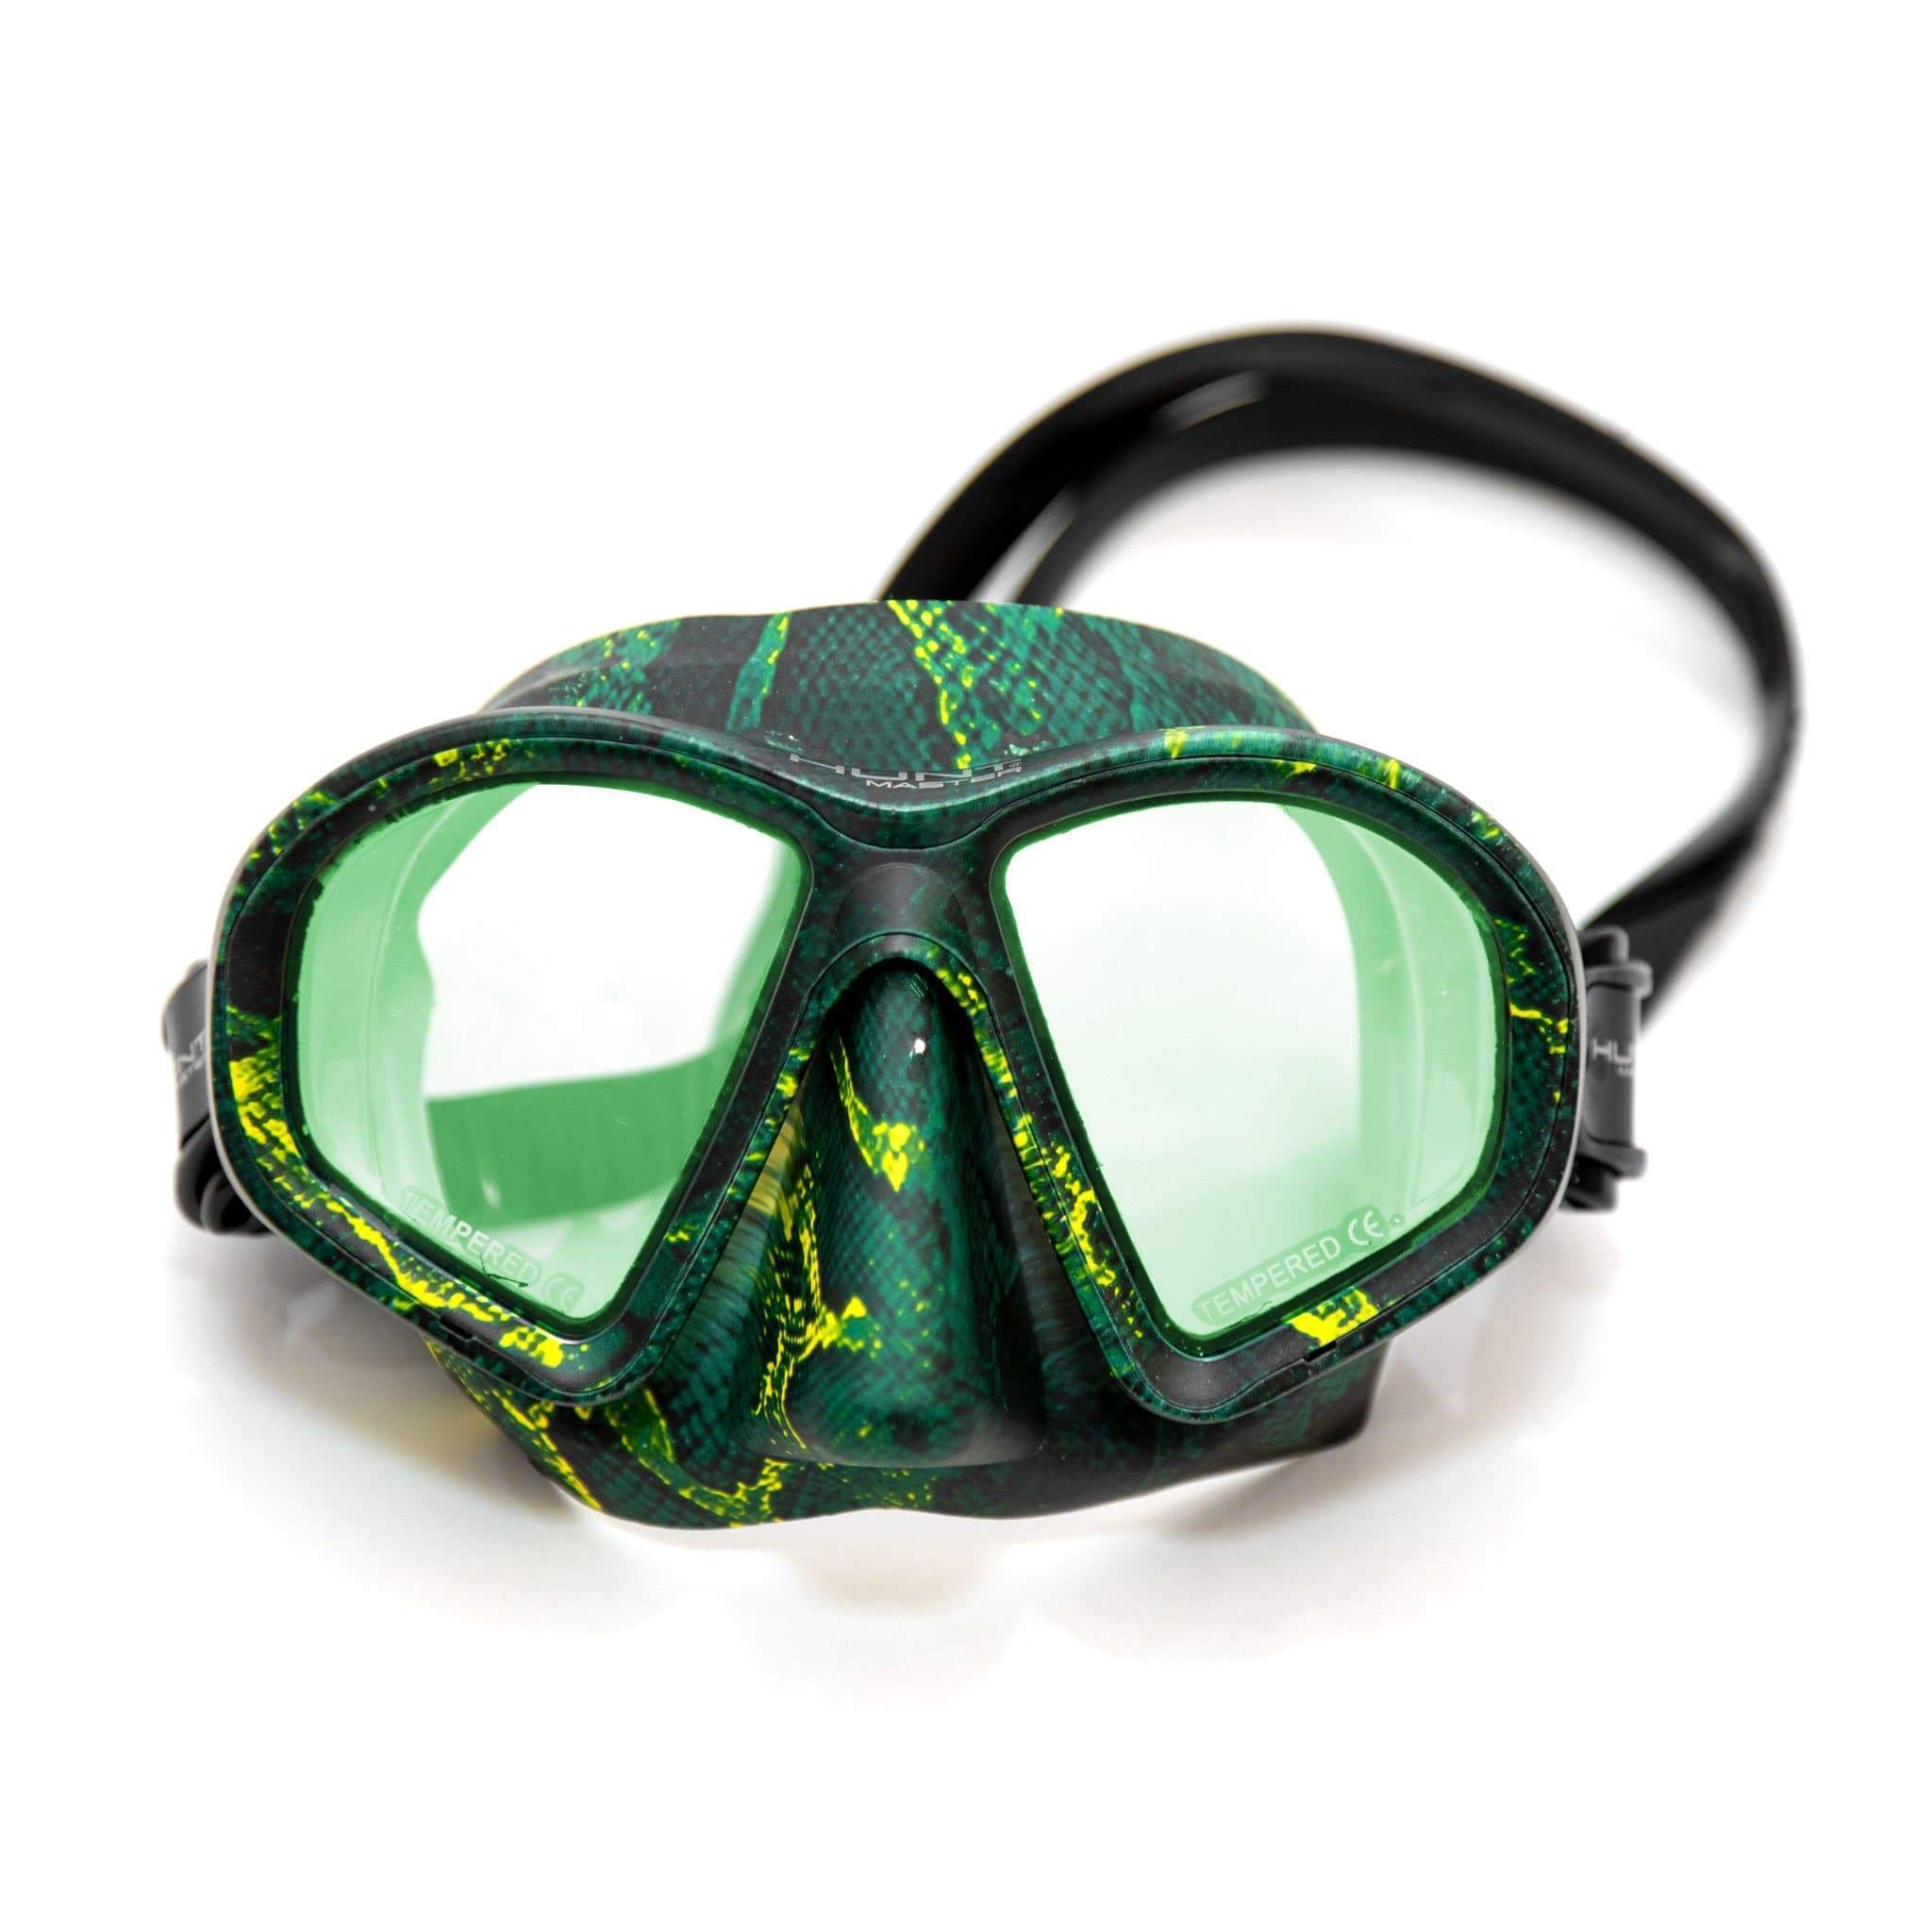 HuntMaster Green Harbinger Camo Diving Mask- With Matching Camo Container (Green)